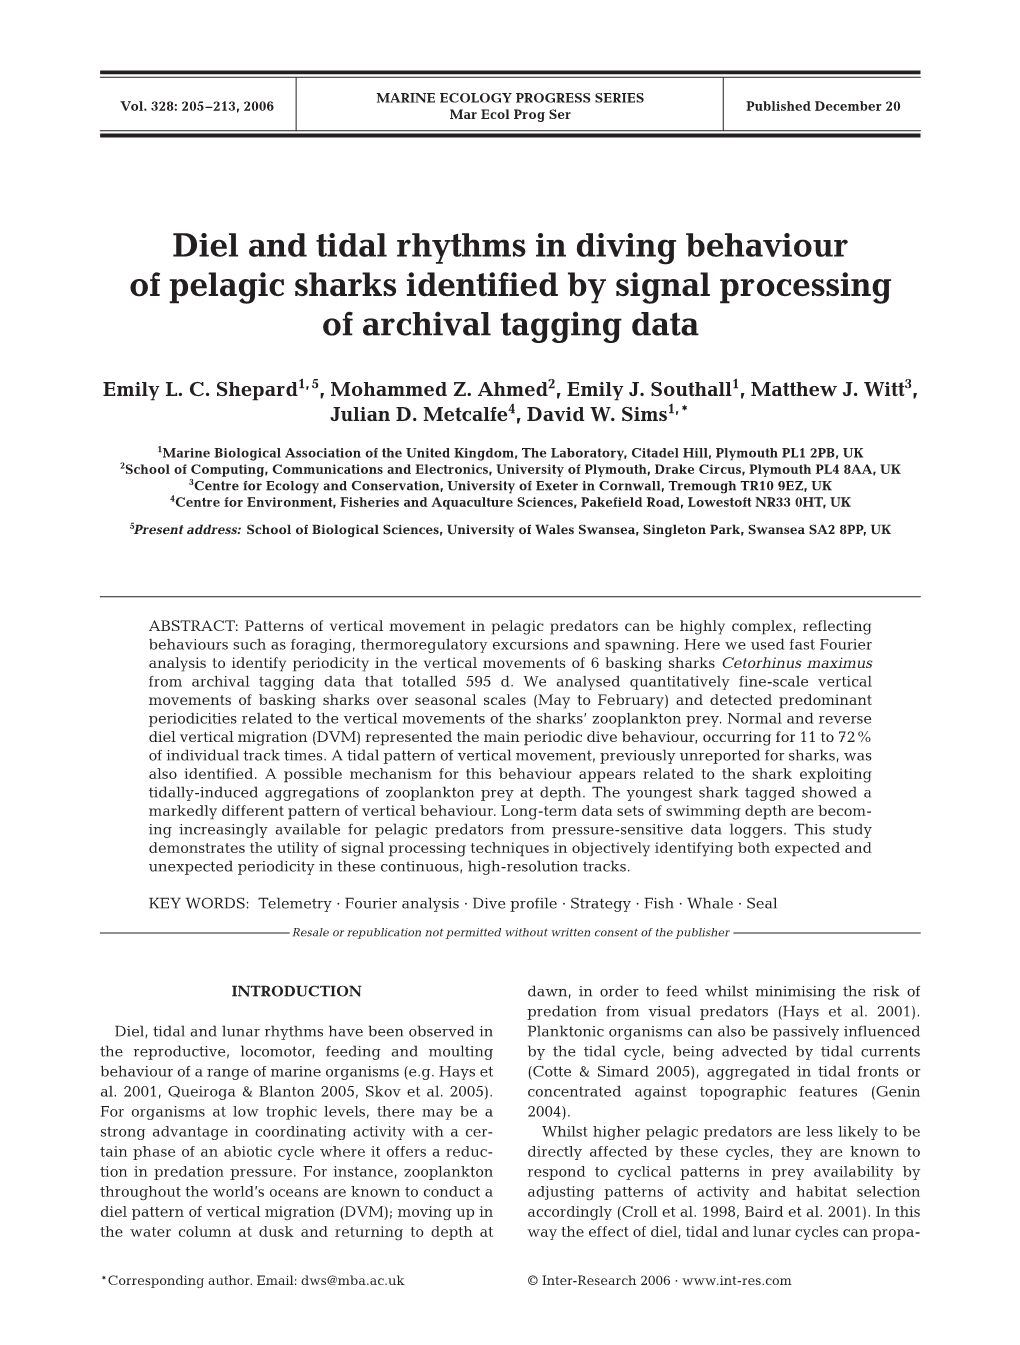 Diel and Tidal Rhythms in Diving Behaviour of Pelagic Sharks Identified by Signal Processing of Archival Tagging Data